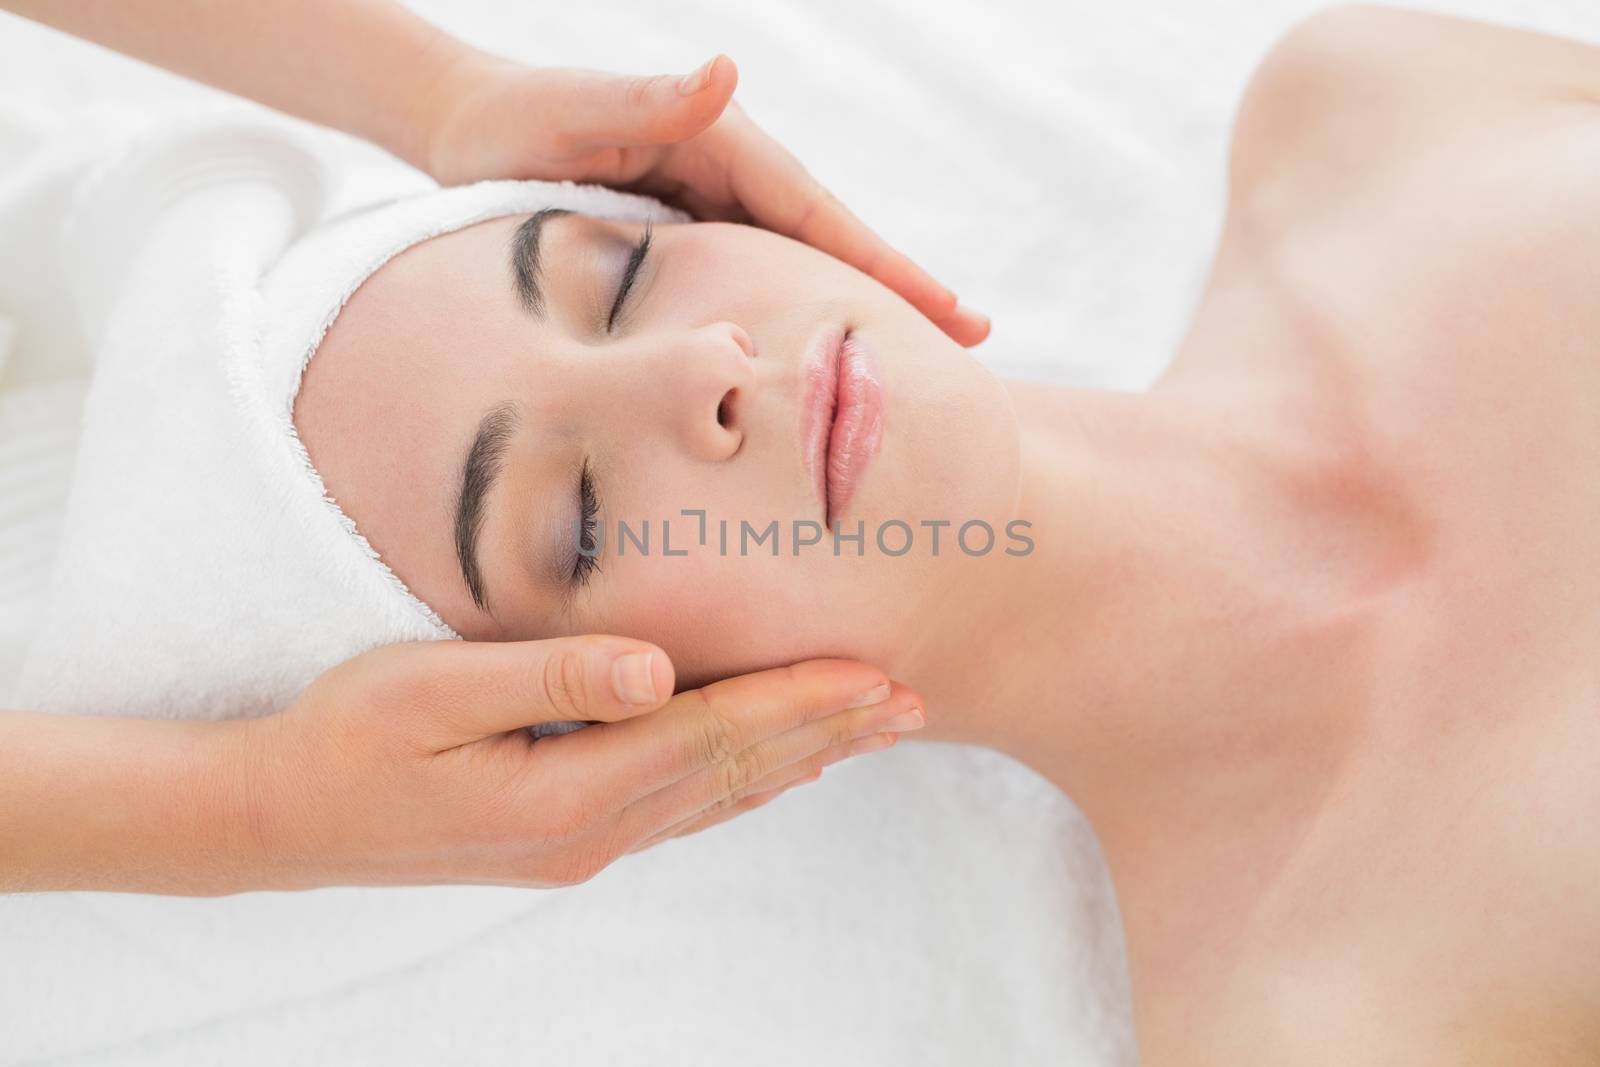 Hands massaging womans face at beauty spa by Wavebreakmedia